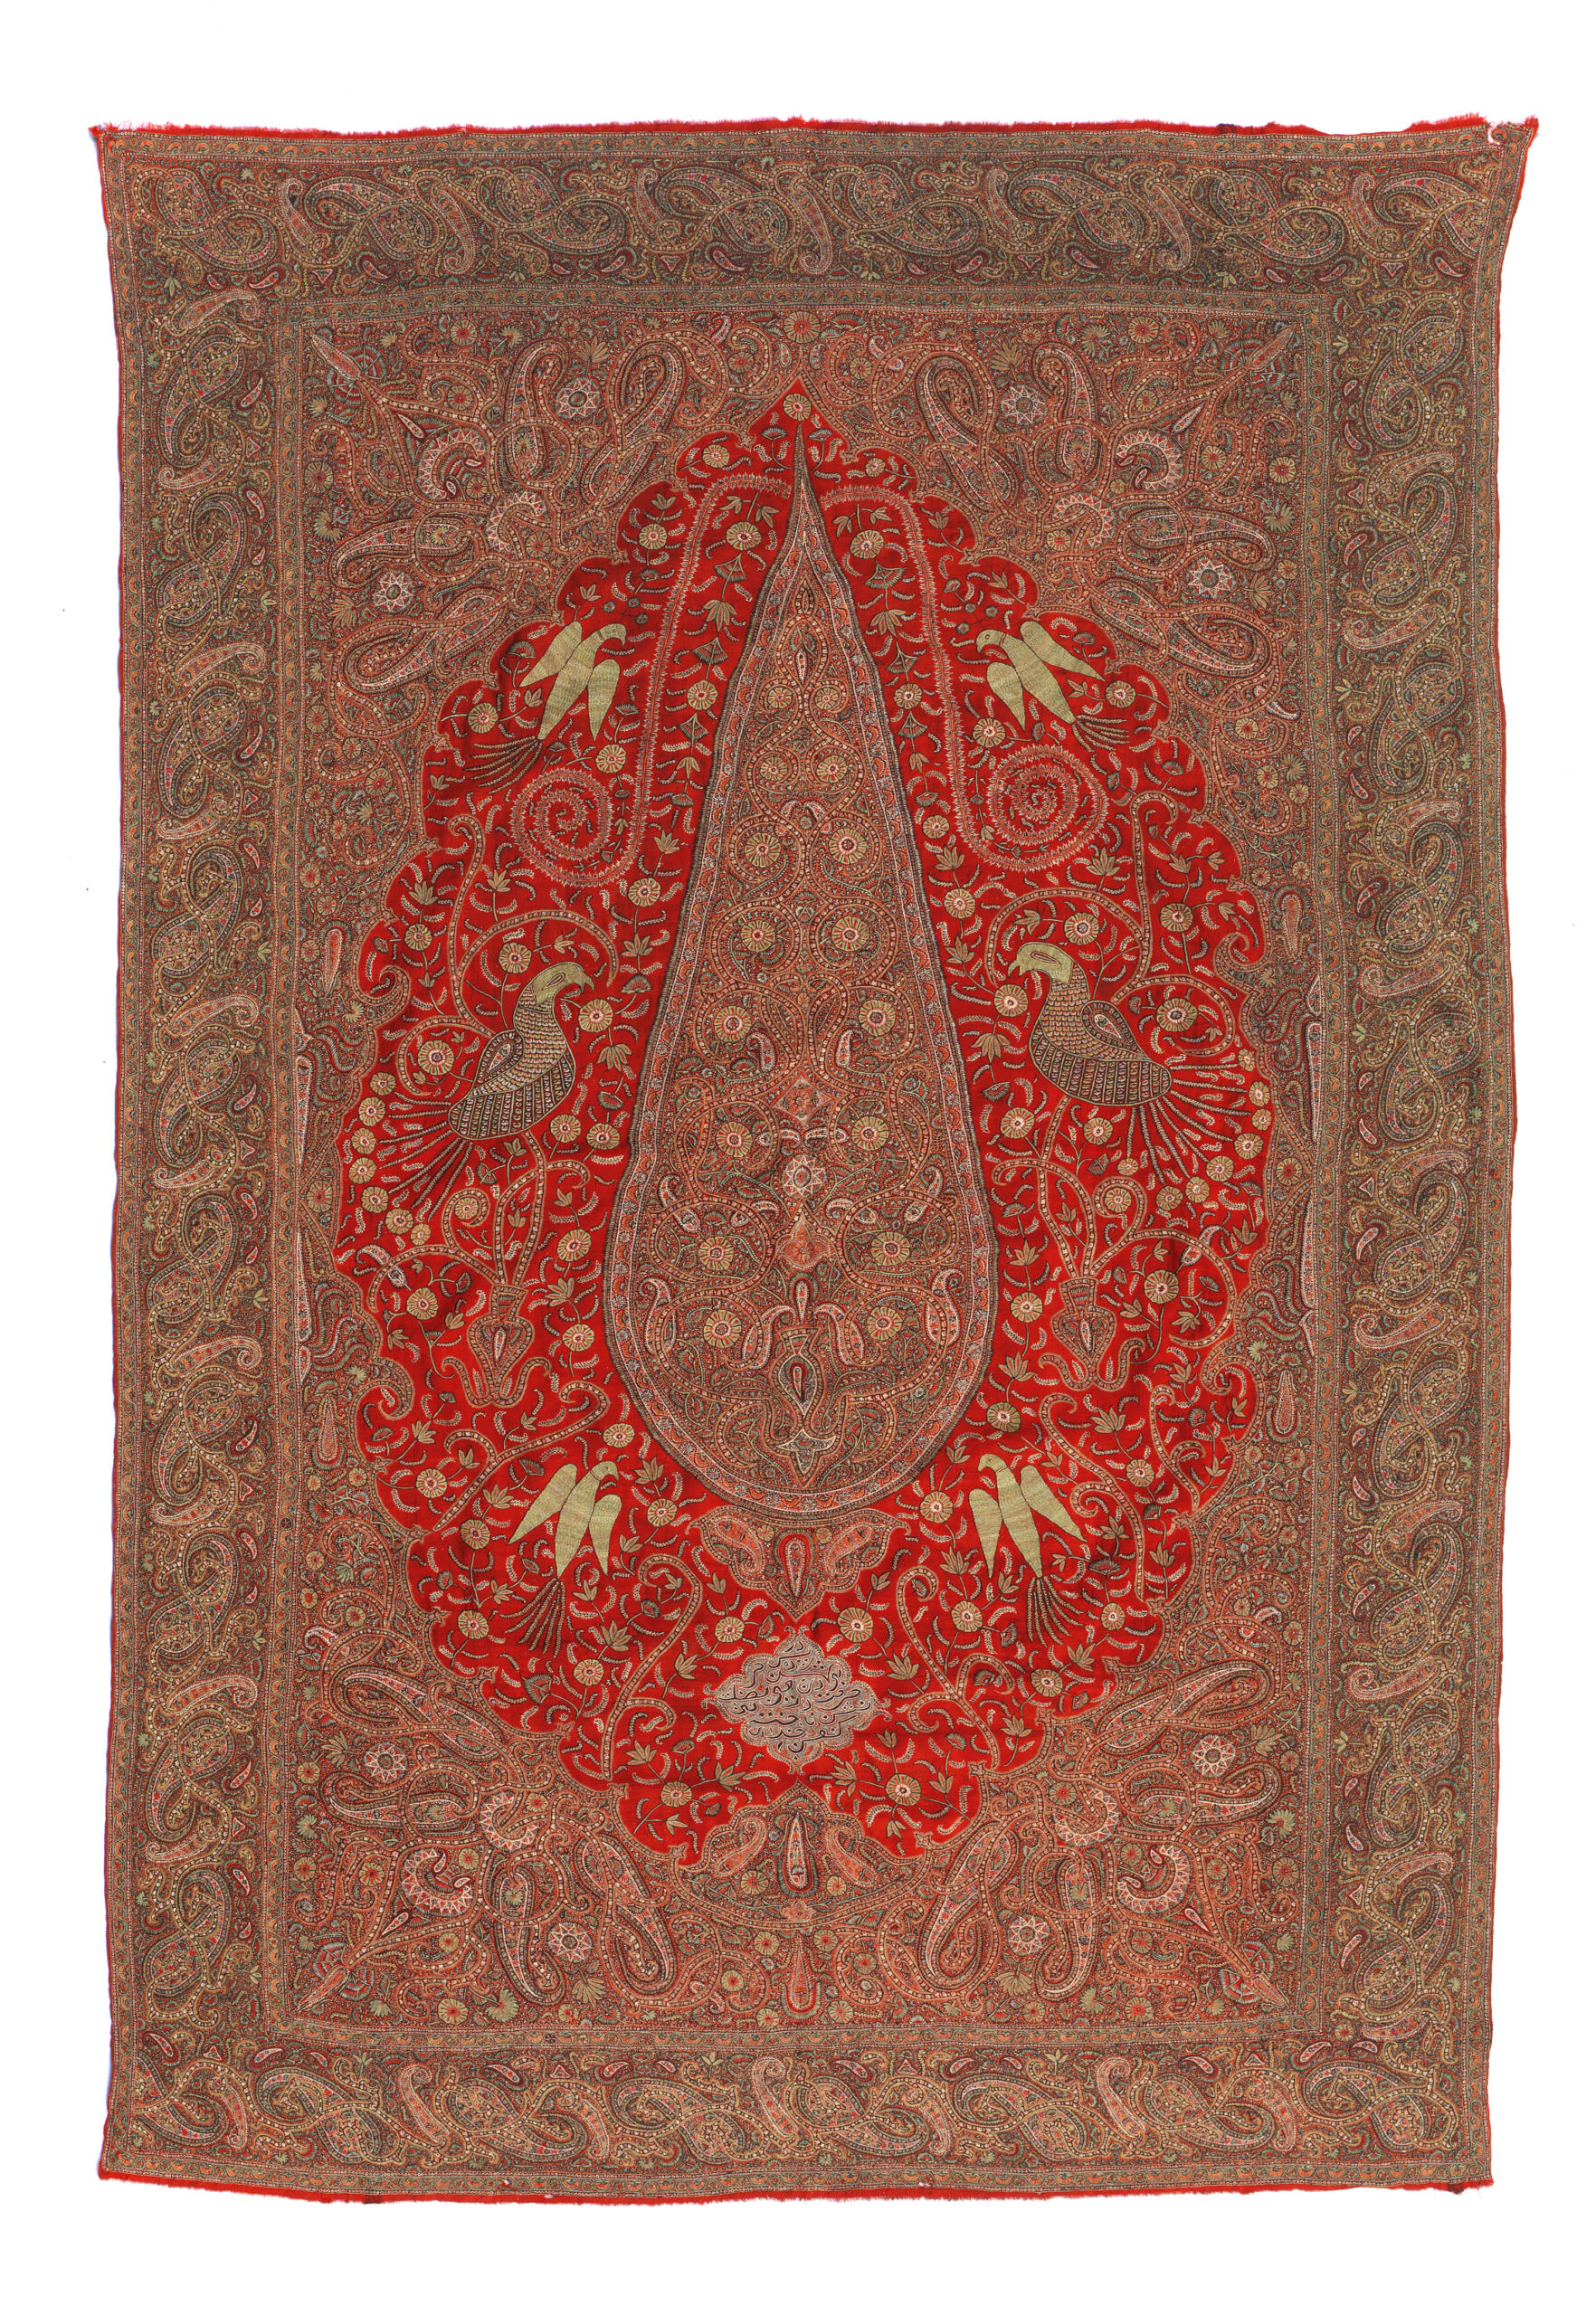 3 Curtain, Kerman, late 19th century. Red wool in twill weave embroidered with coloured silks in pateh-duzi technique with a design of a cypress tree among birds